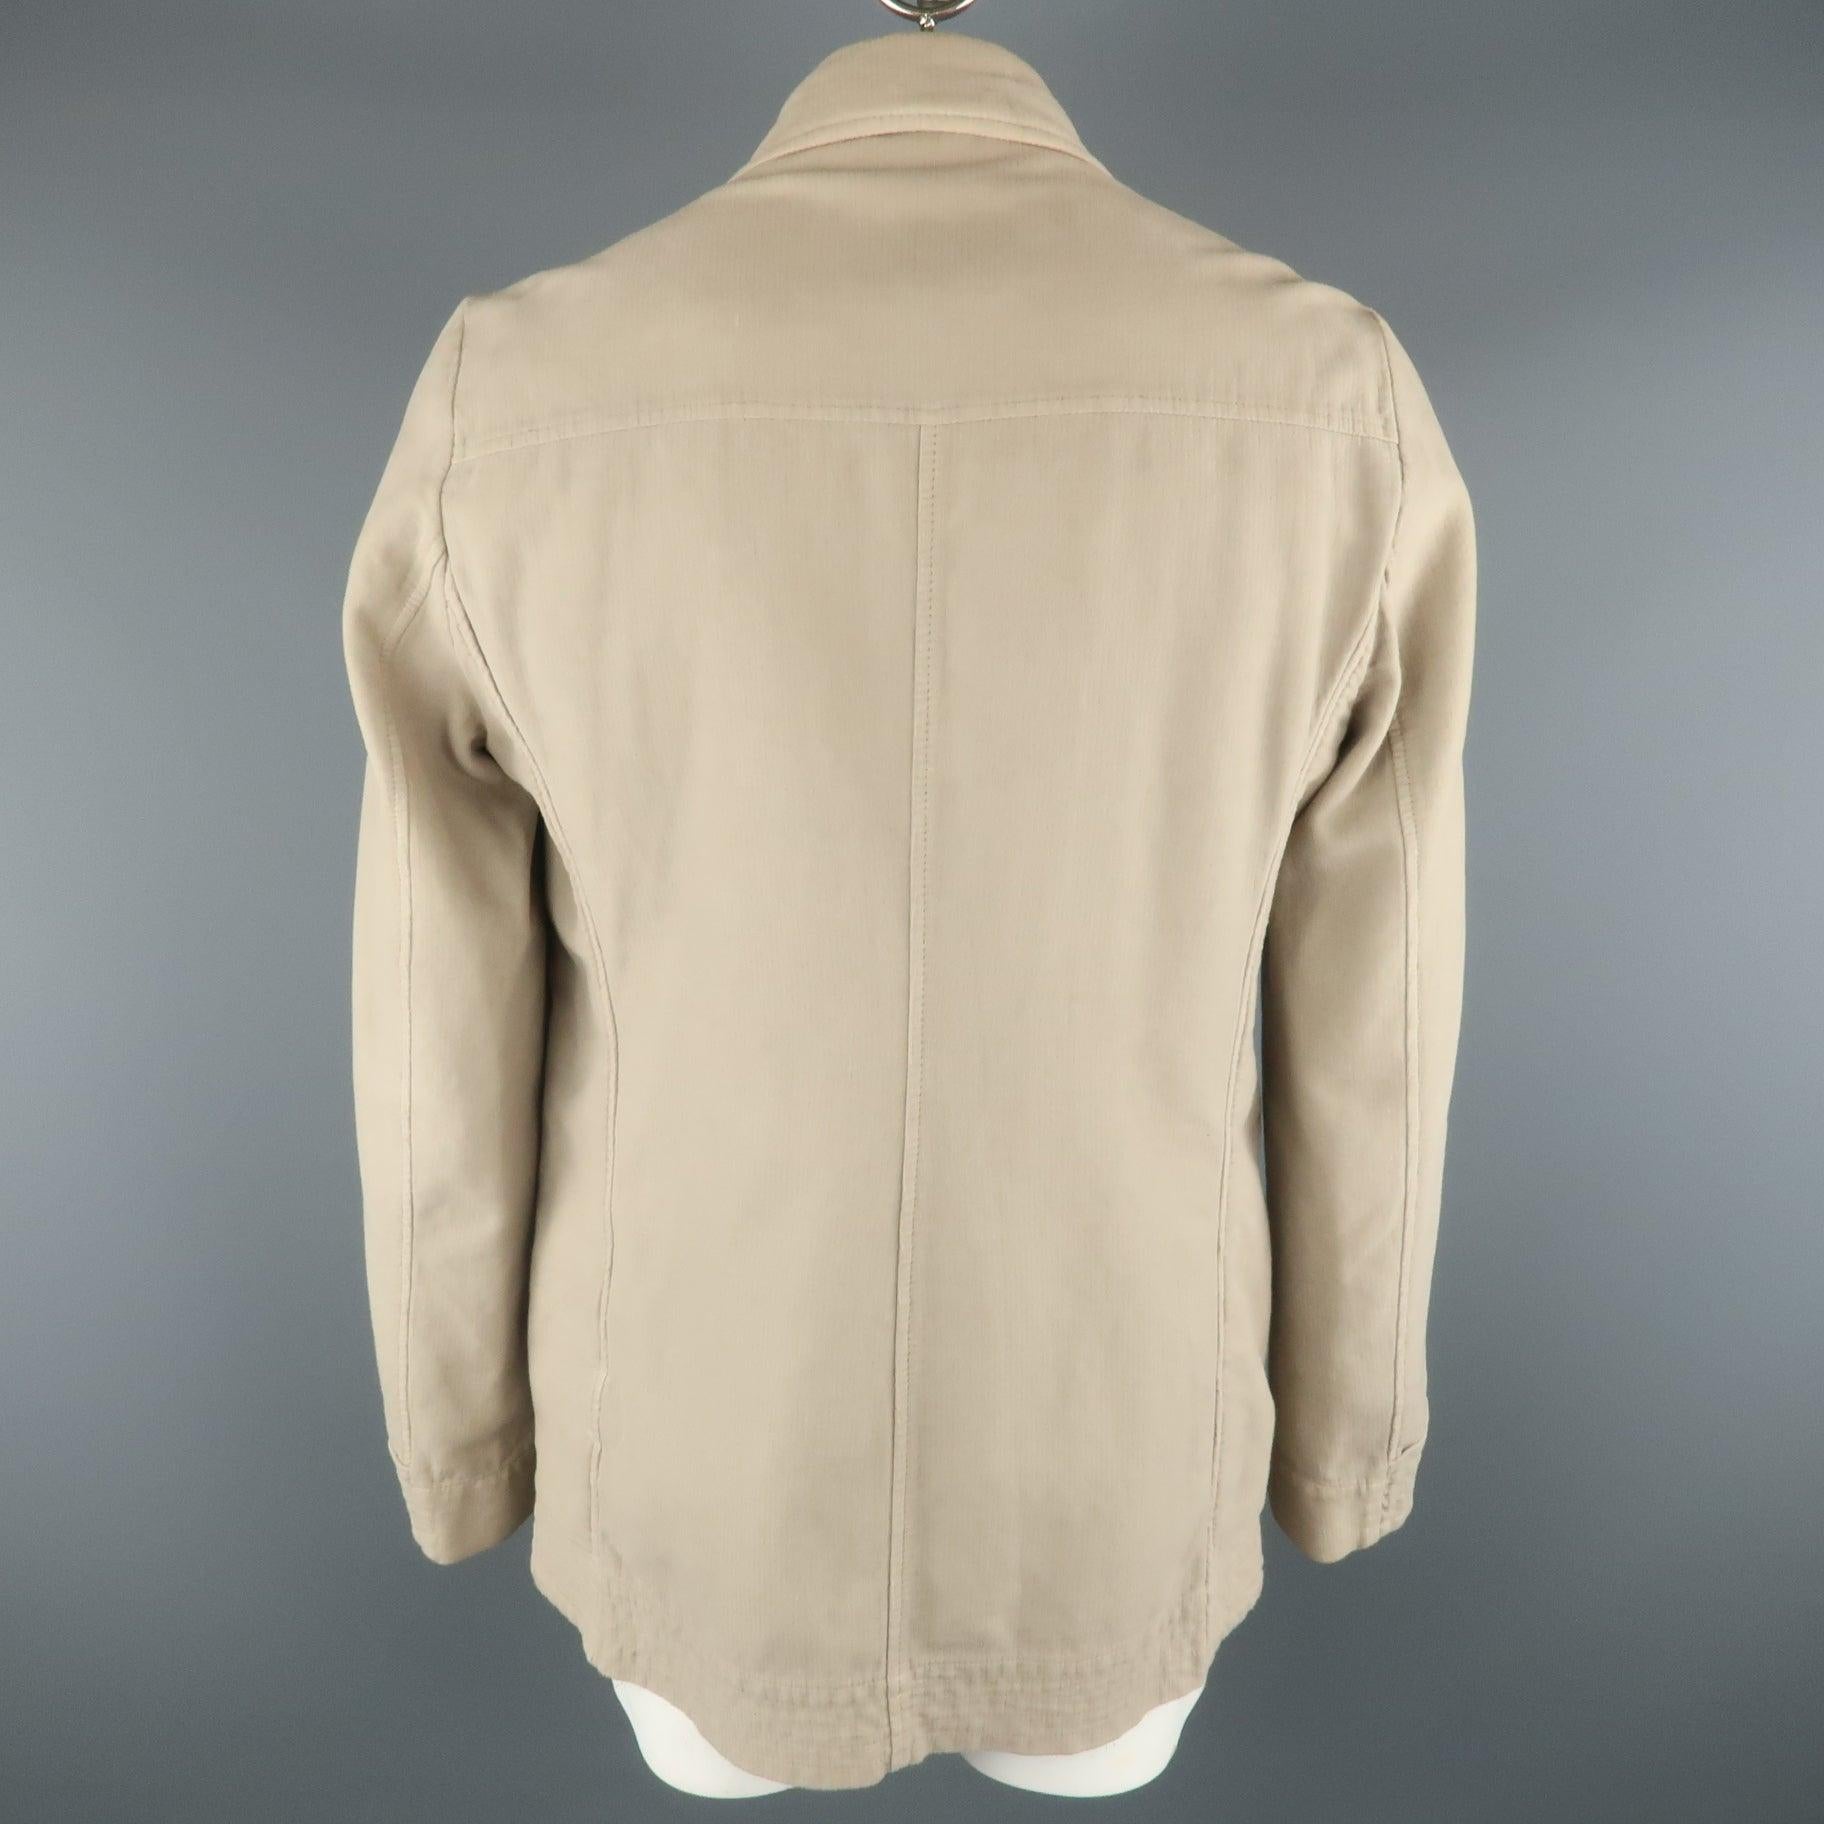 STEPHAN SCHNEIDER Peacoat comes in a khaki tone in a solid cotton material, with a notch lapel, slit pockets, hidden buttons at closure, double breasted. Made in Belgium. Very Good Pre-Owned Condition. 

Marked:   5 

Measurements: 
 
Shoulder: 17.5